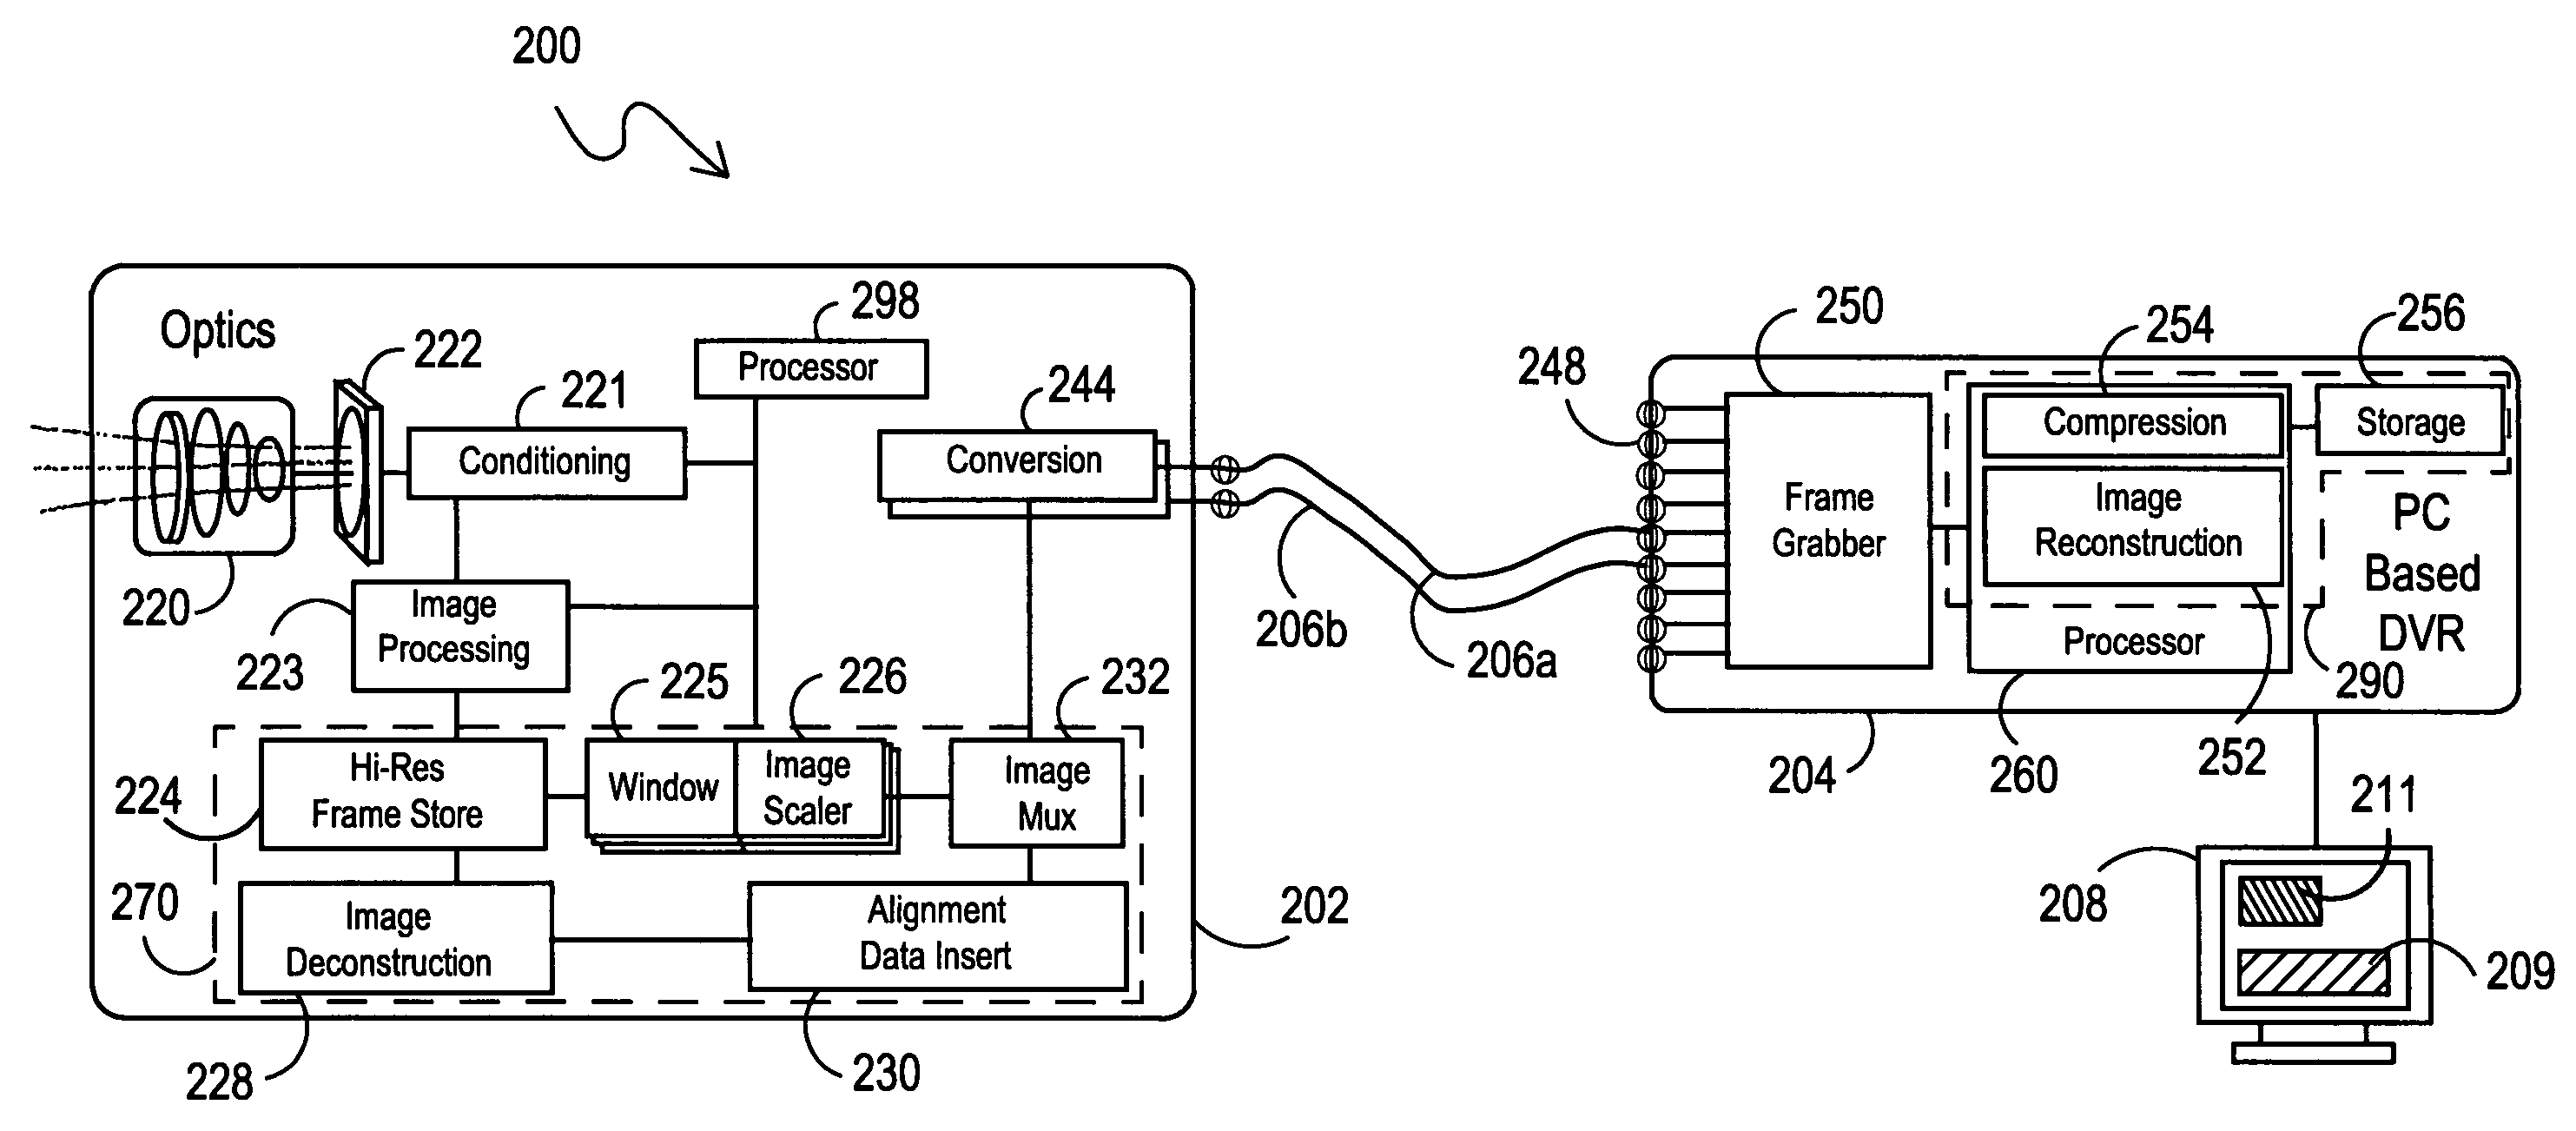 Systems and methods for multi-resolution image processing